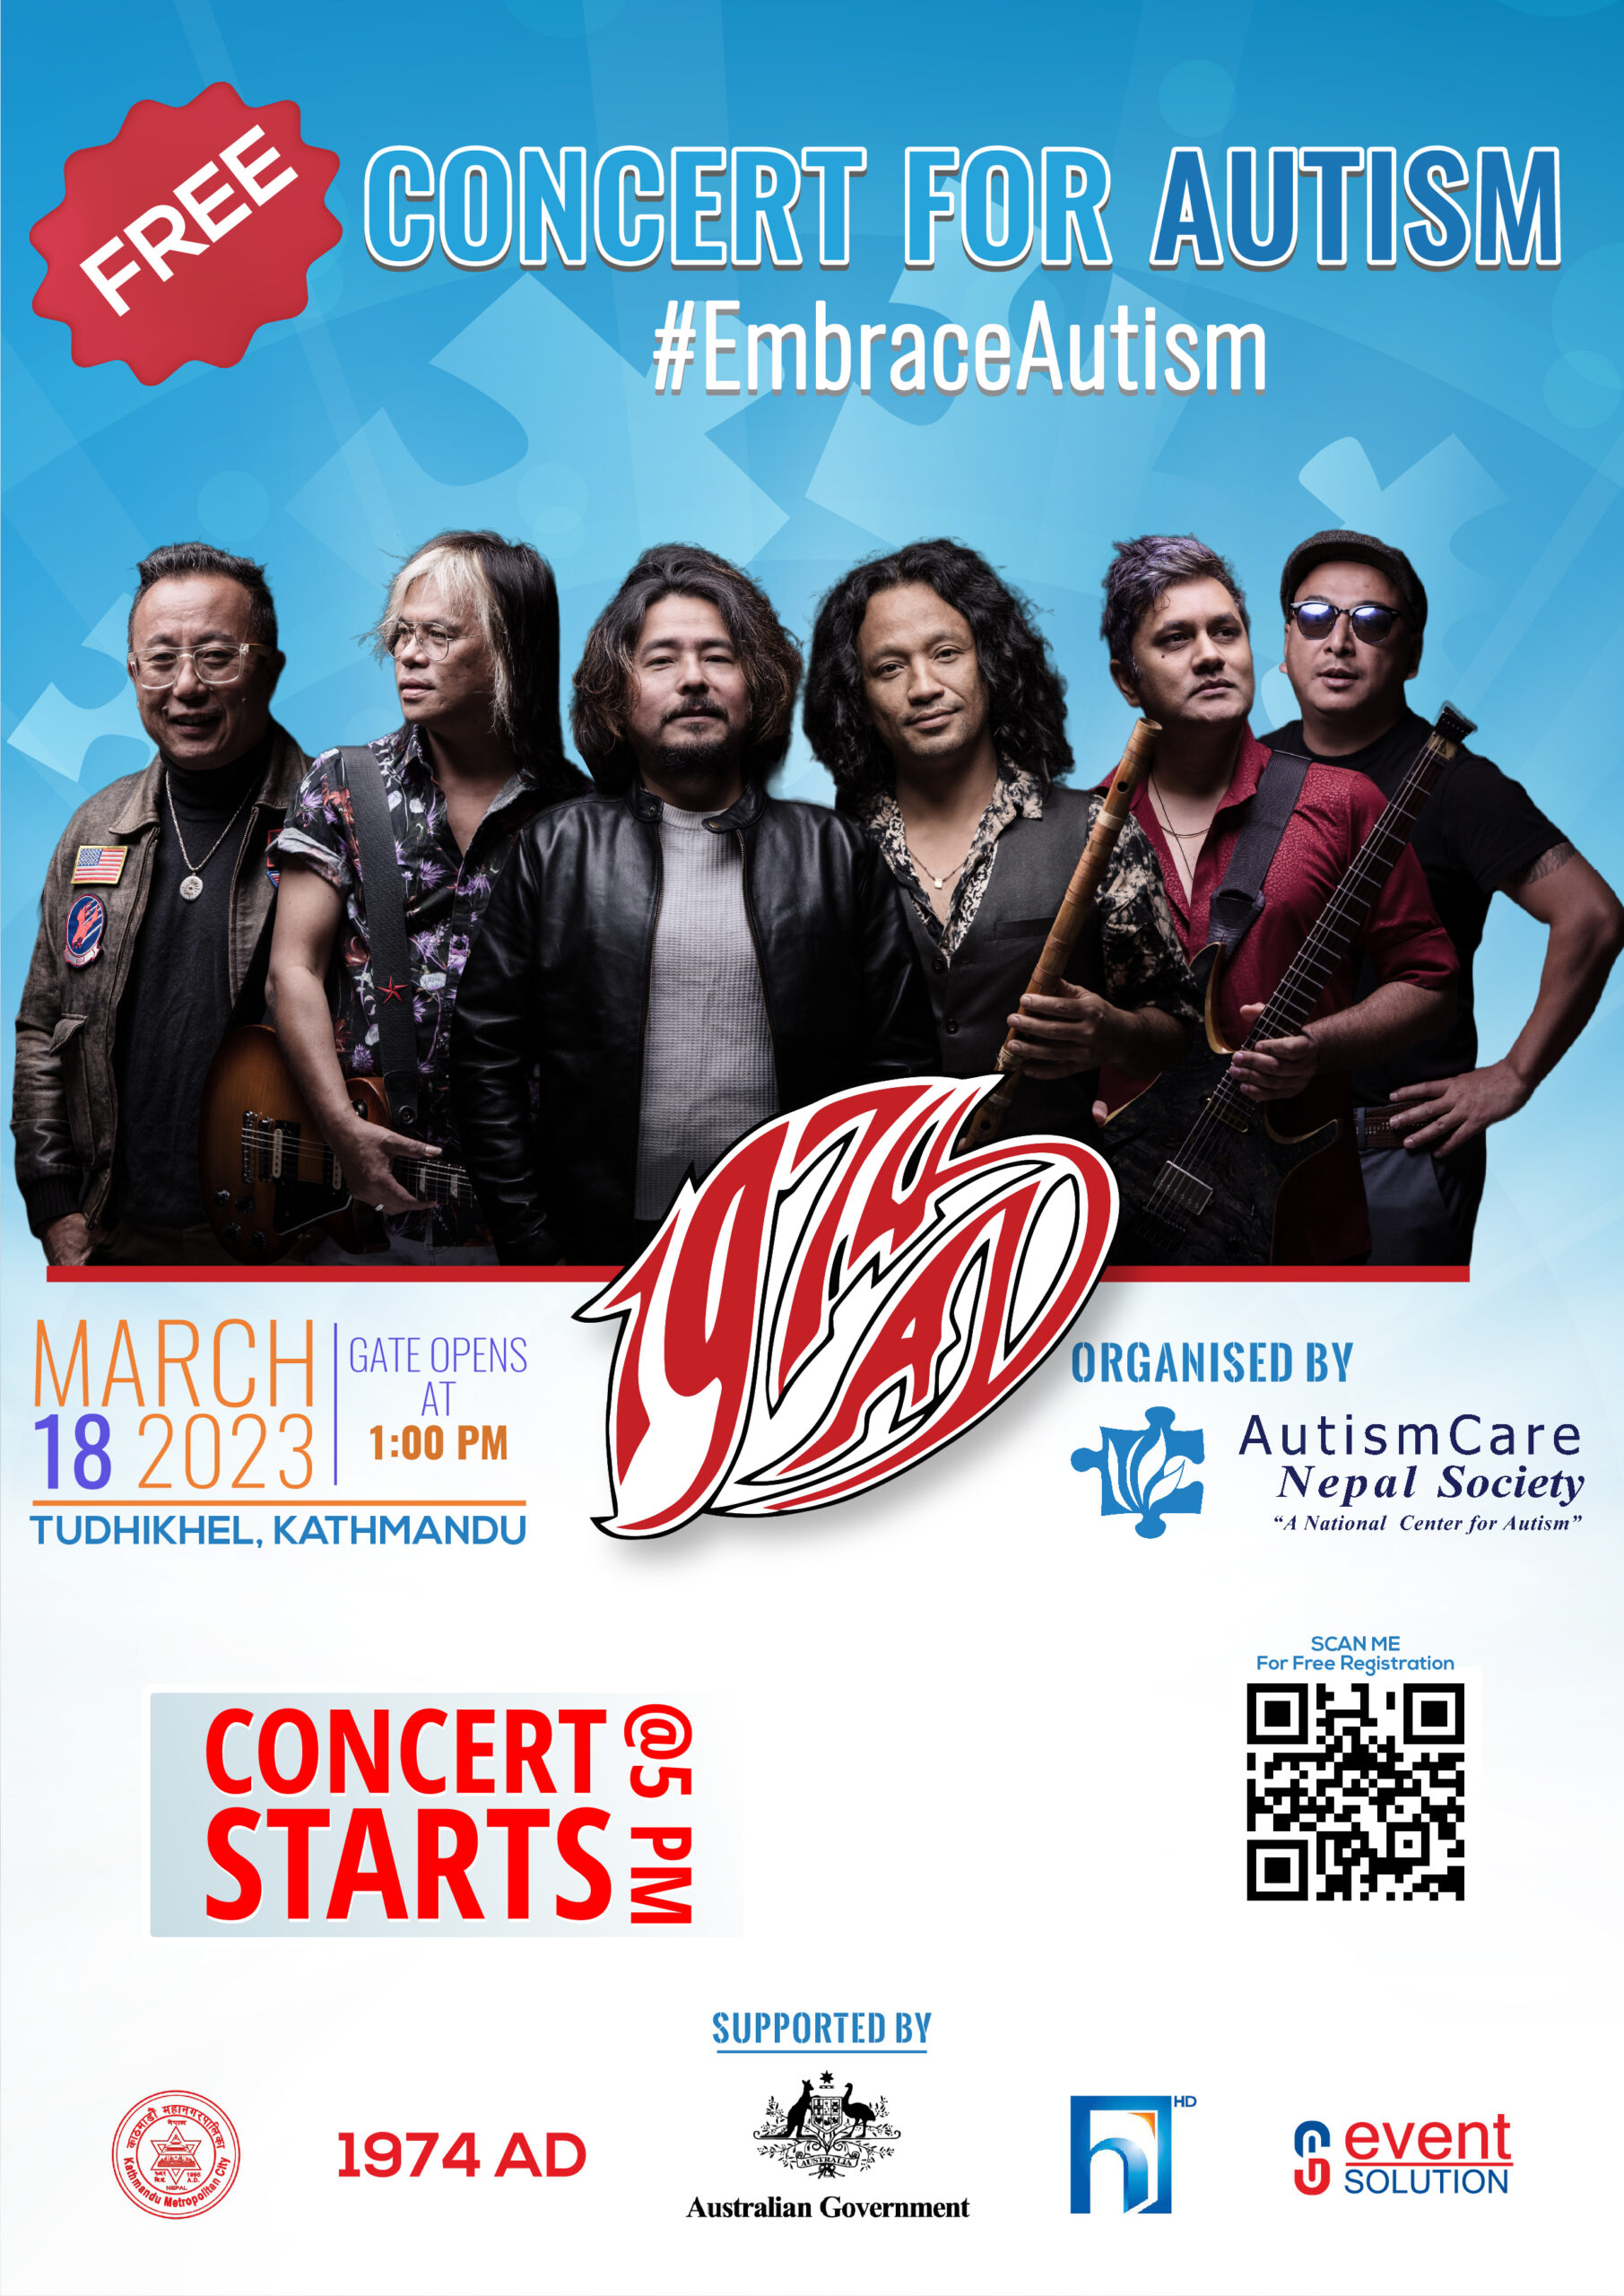 Free concert for Autism by 1974 AD at Tudikhel on March 18 from 5pm onwards